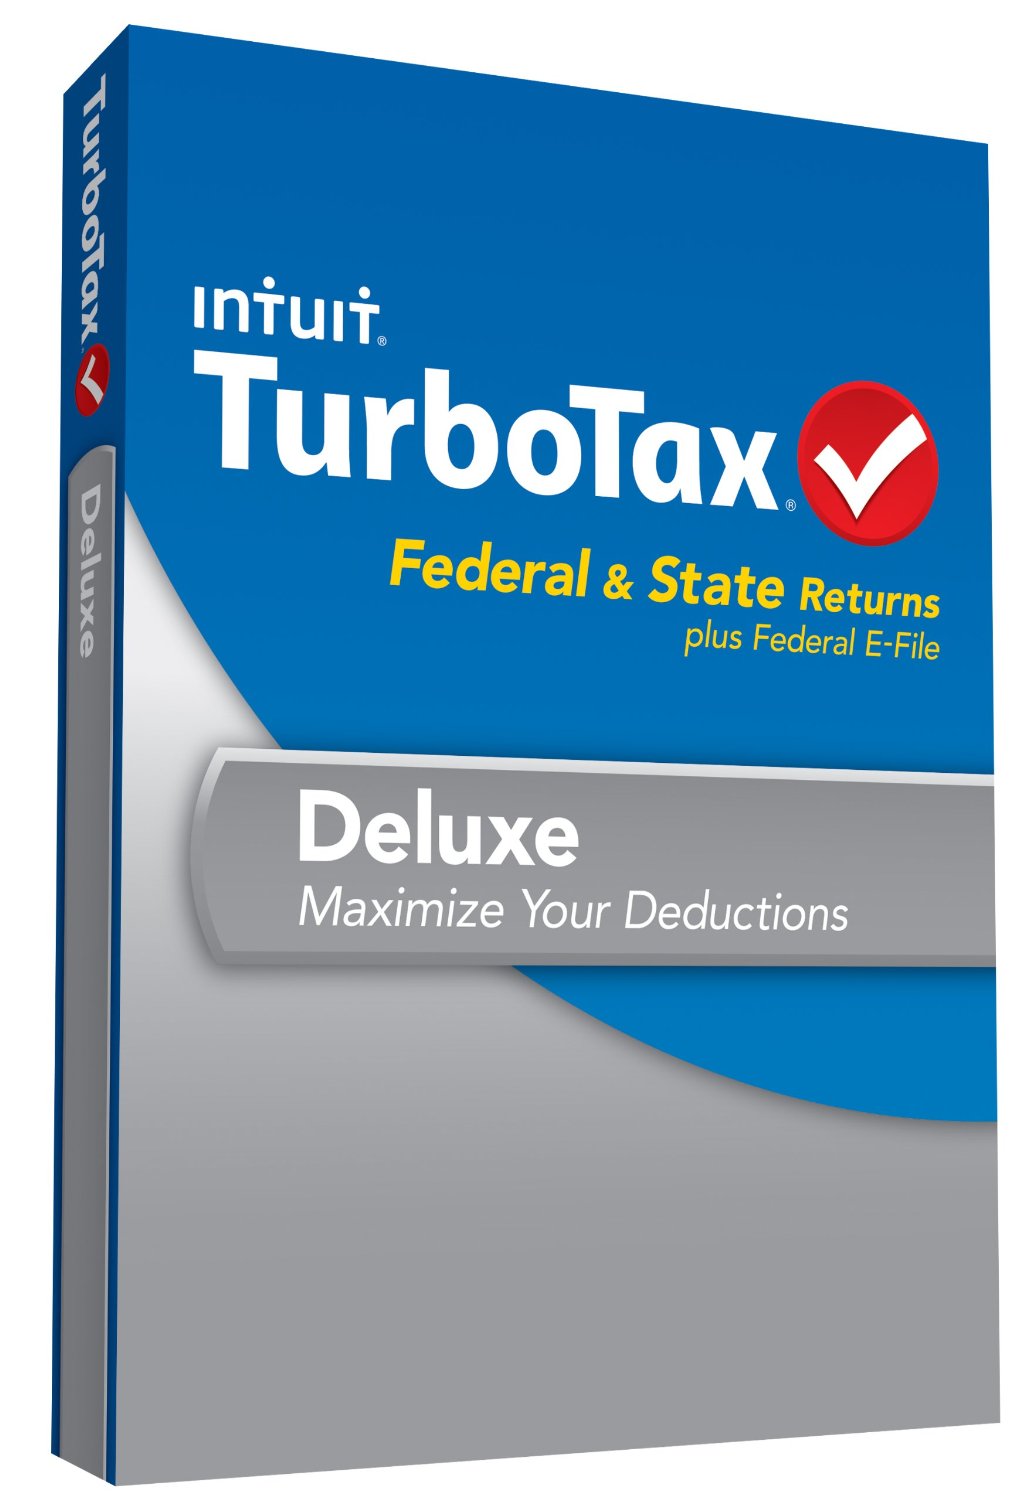 TurboTax Deluxe Fed, Efile and State 2013 w/ refund bonus offer 40